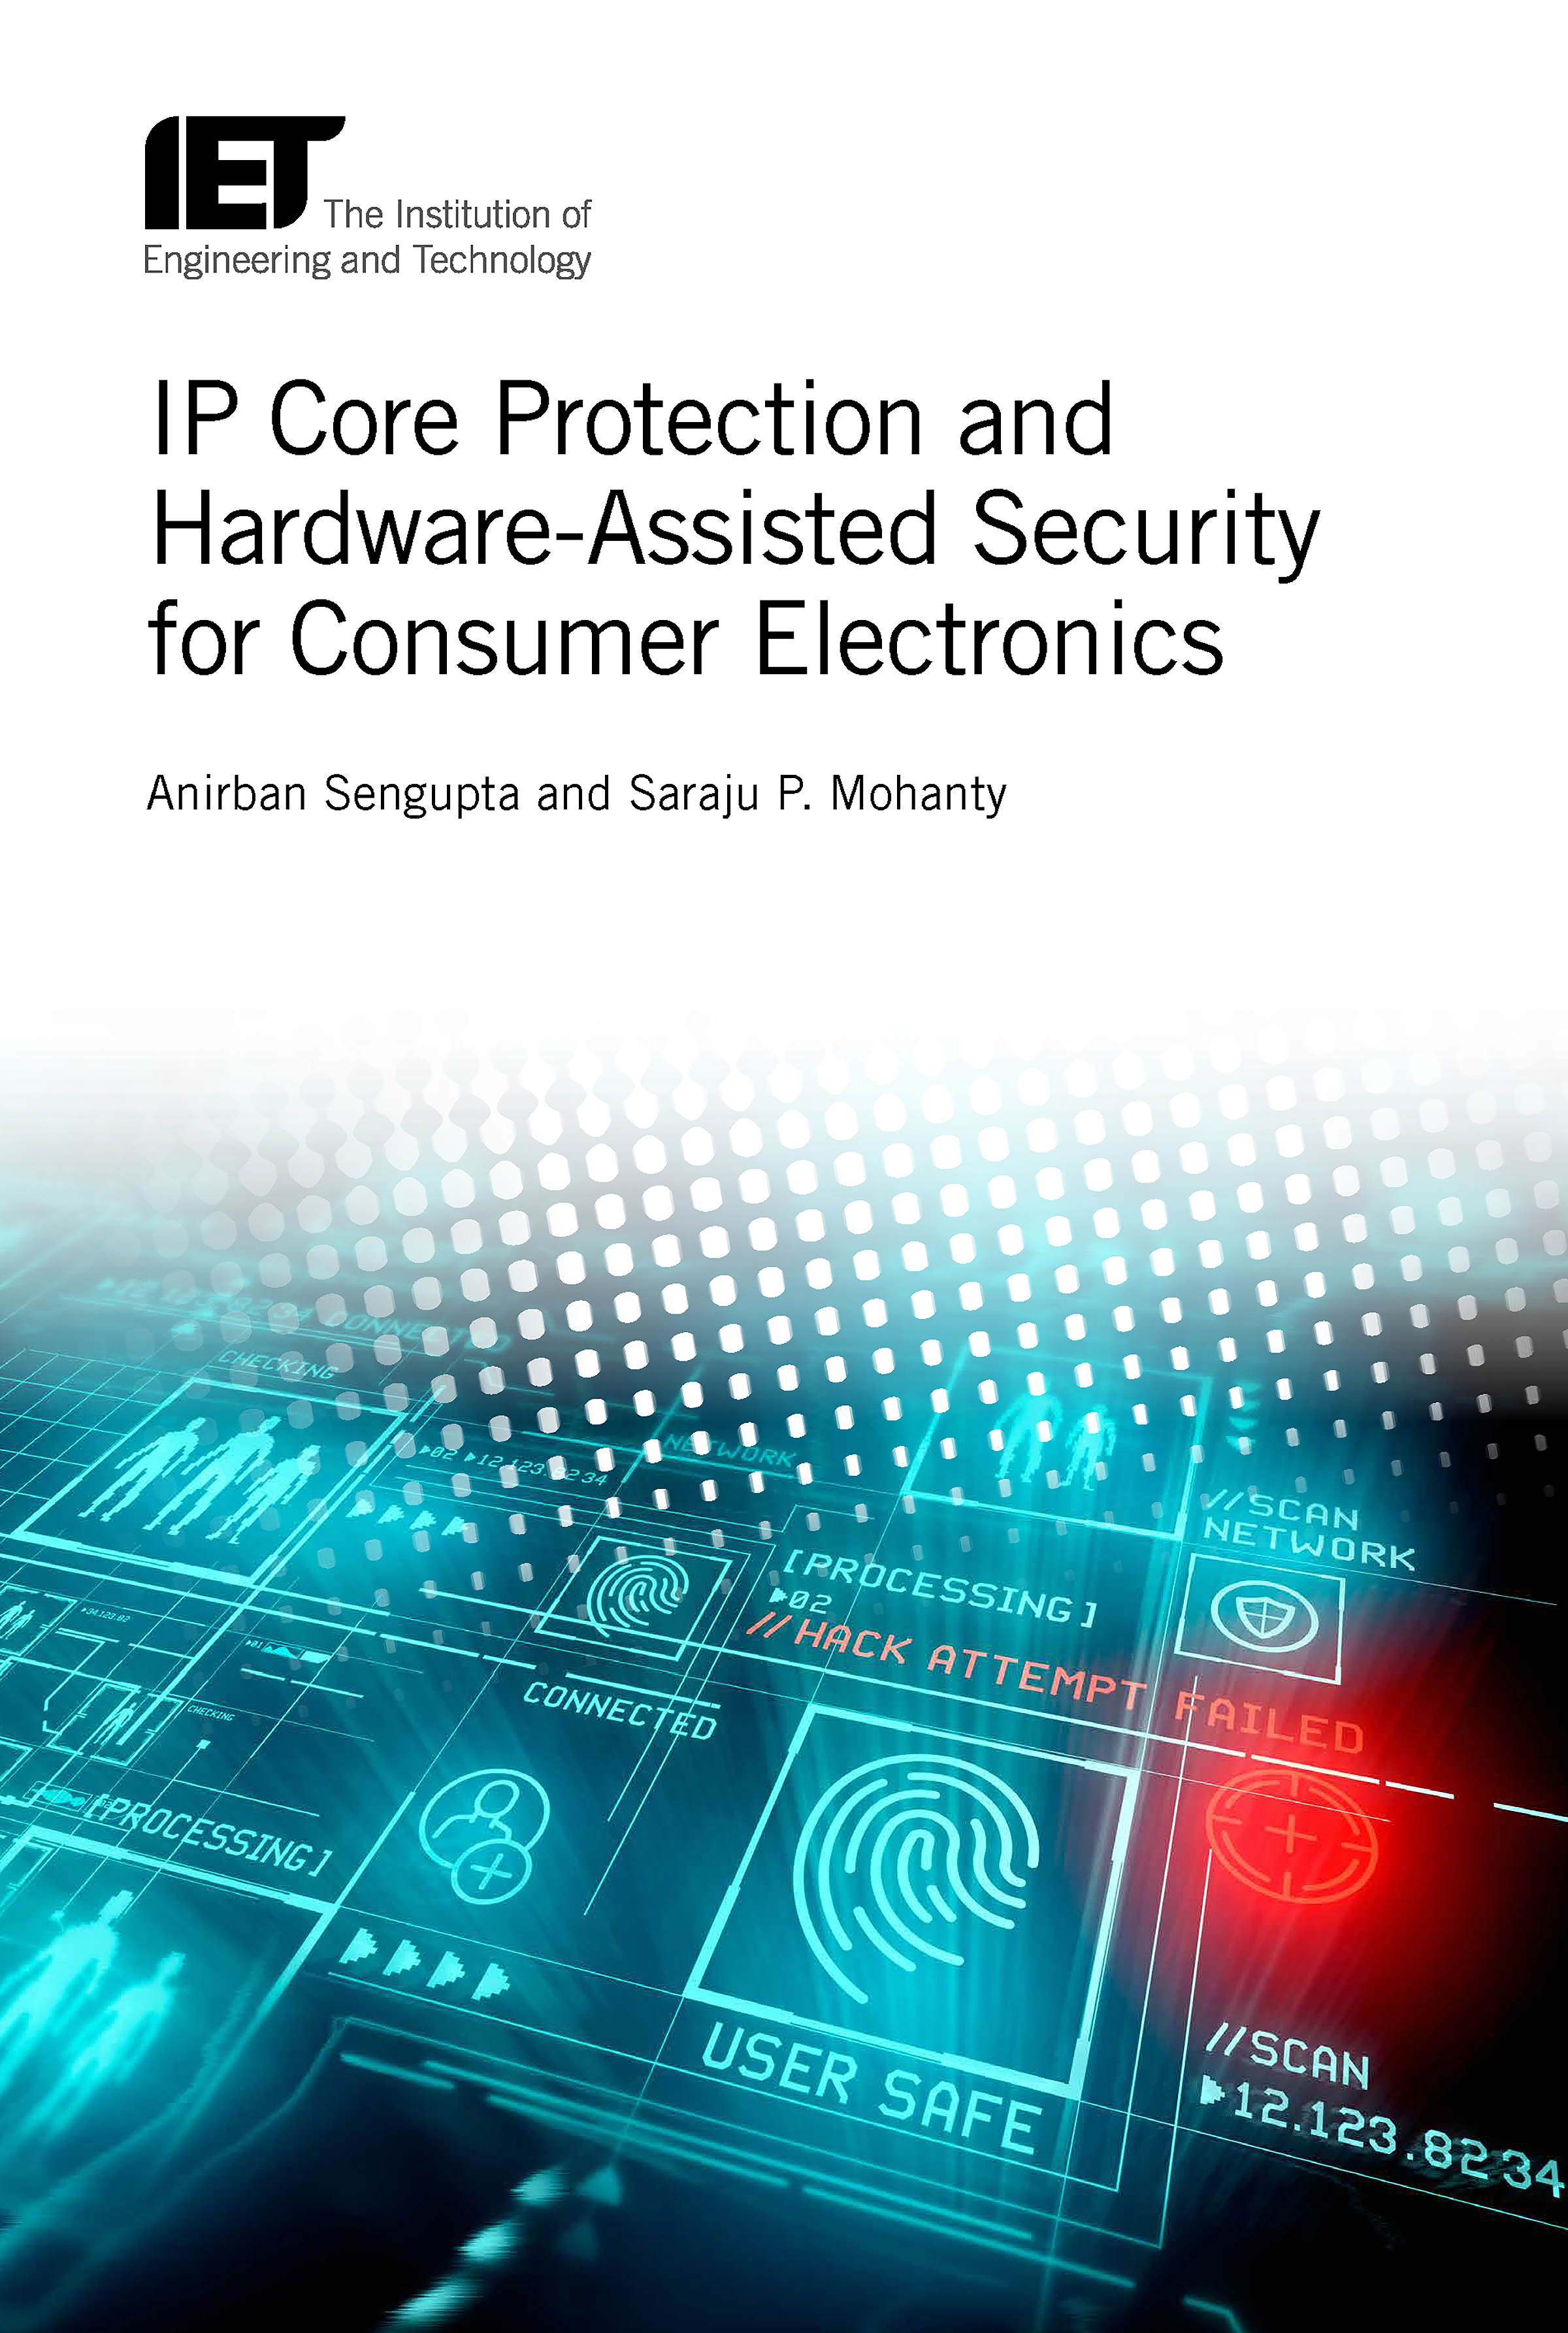 IP Core Protection andHardware-Assisted Security for Consumer Electronics, The Institute of Engineering and Technology (IET), 2019